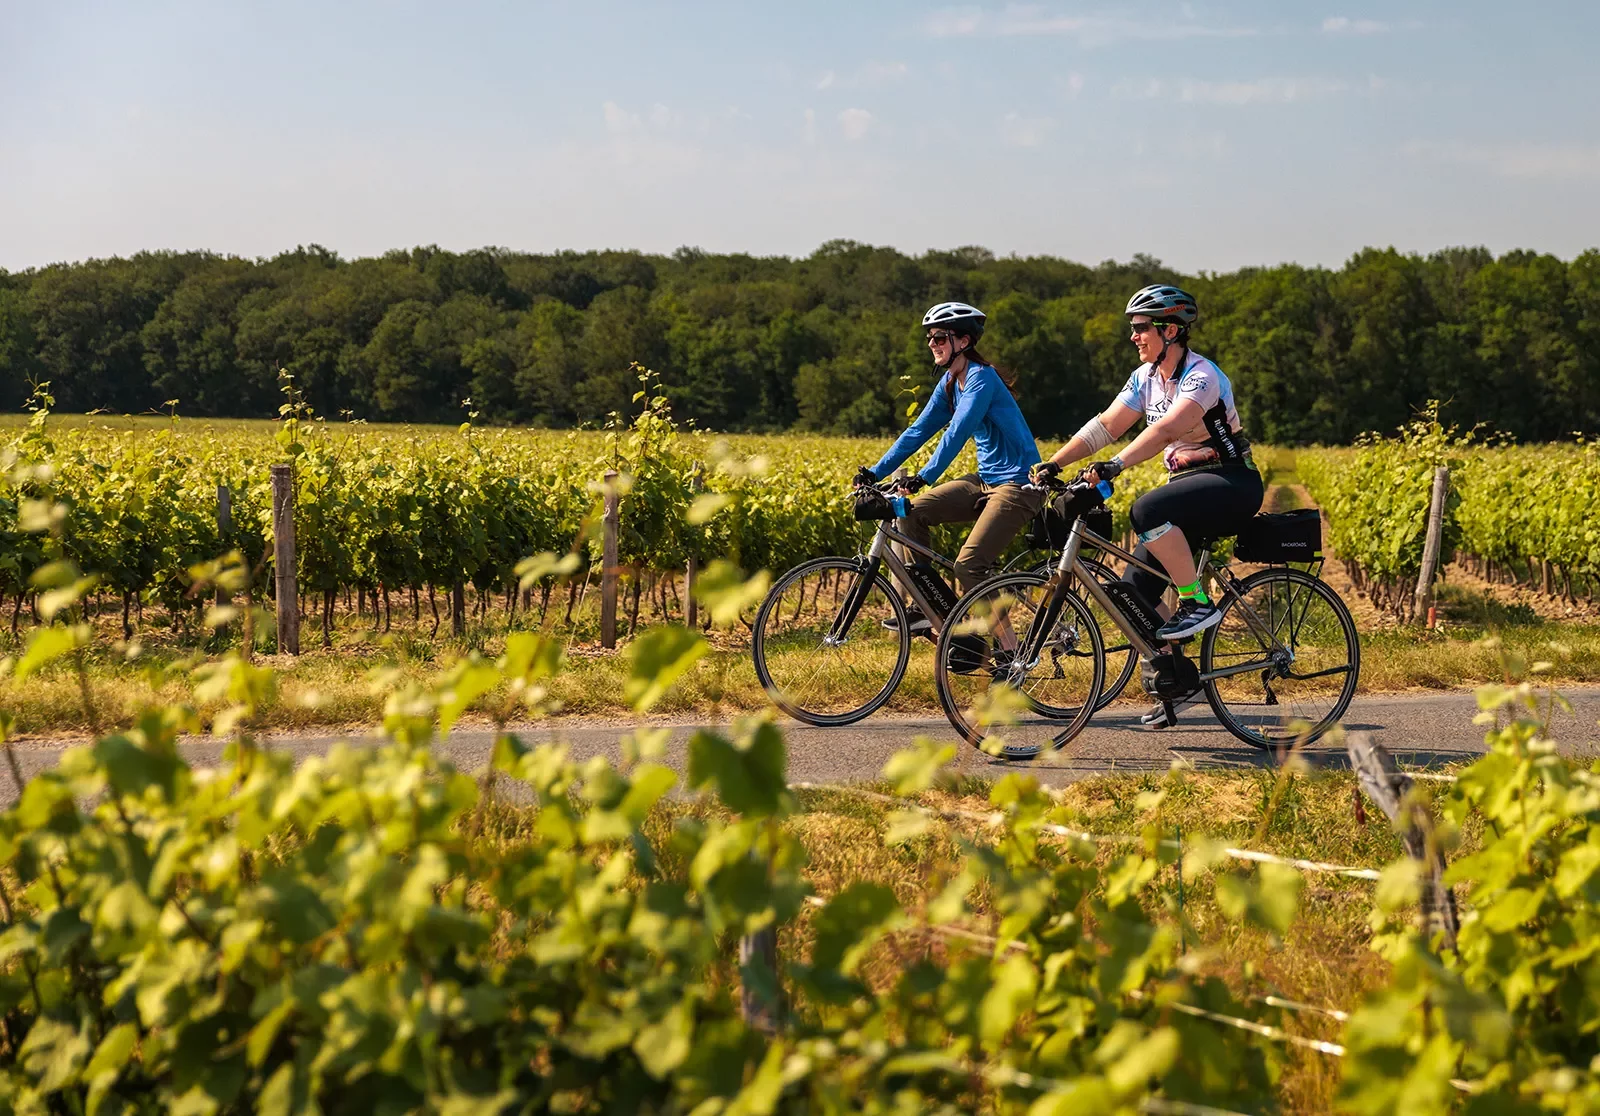 Two bikers cycling on a road through vineyards.